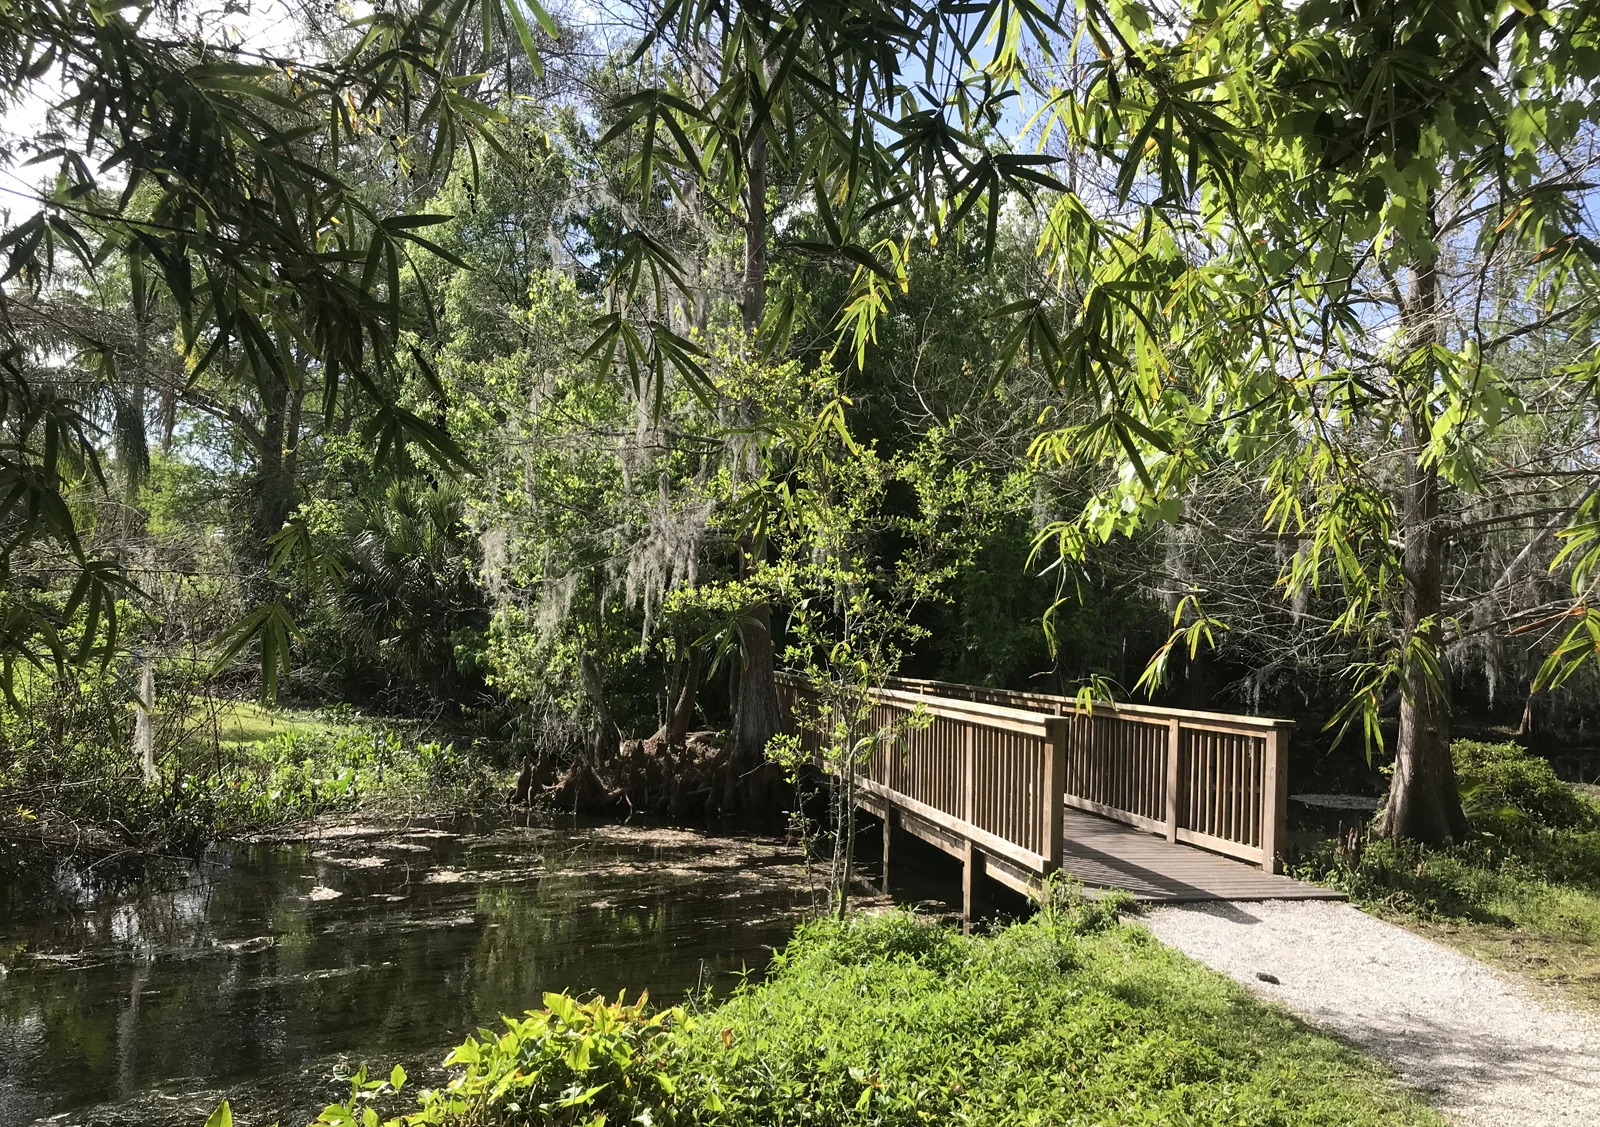 Things to do in Winter Park: Mead Botanical Garden offers a scenic walking trail. (Photo: Bonnie Gross)